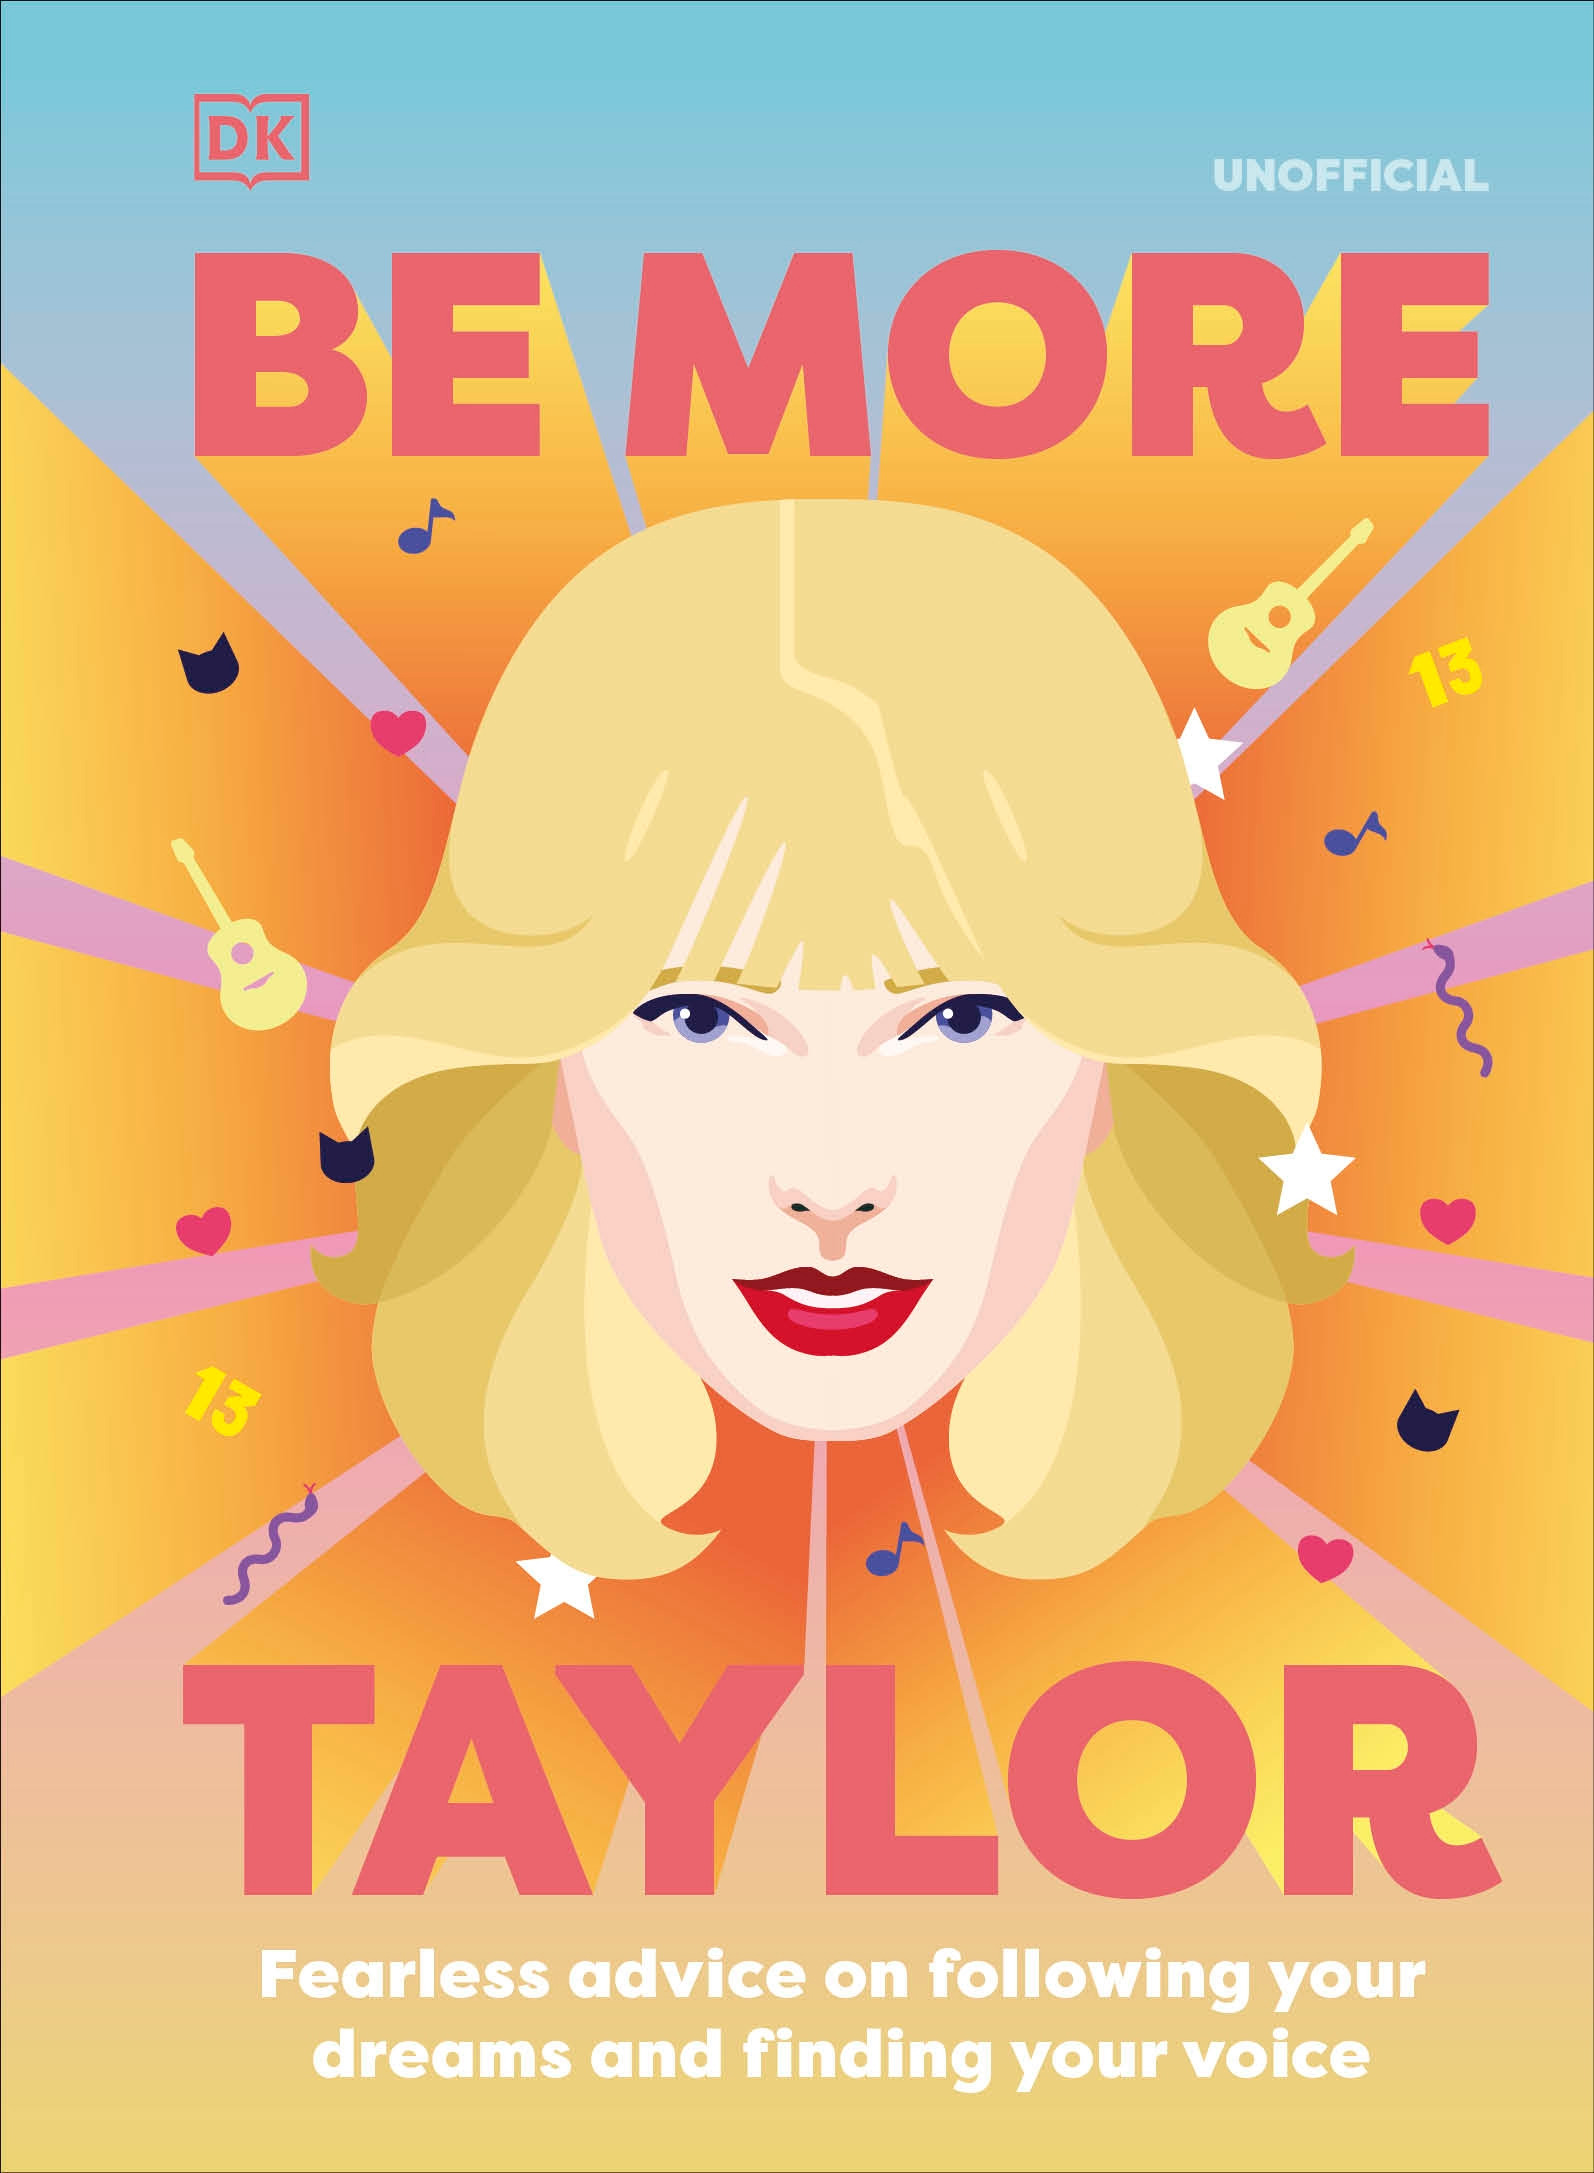 BE MORE TAYLOR SWIFT, by DK